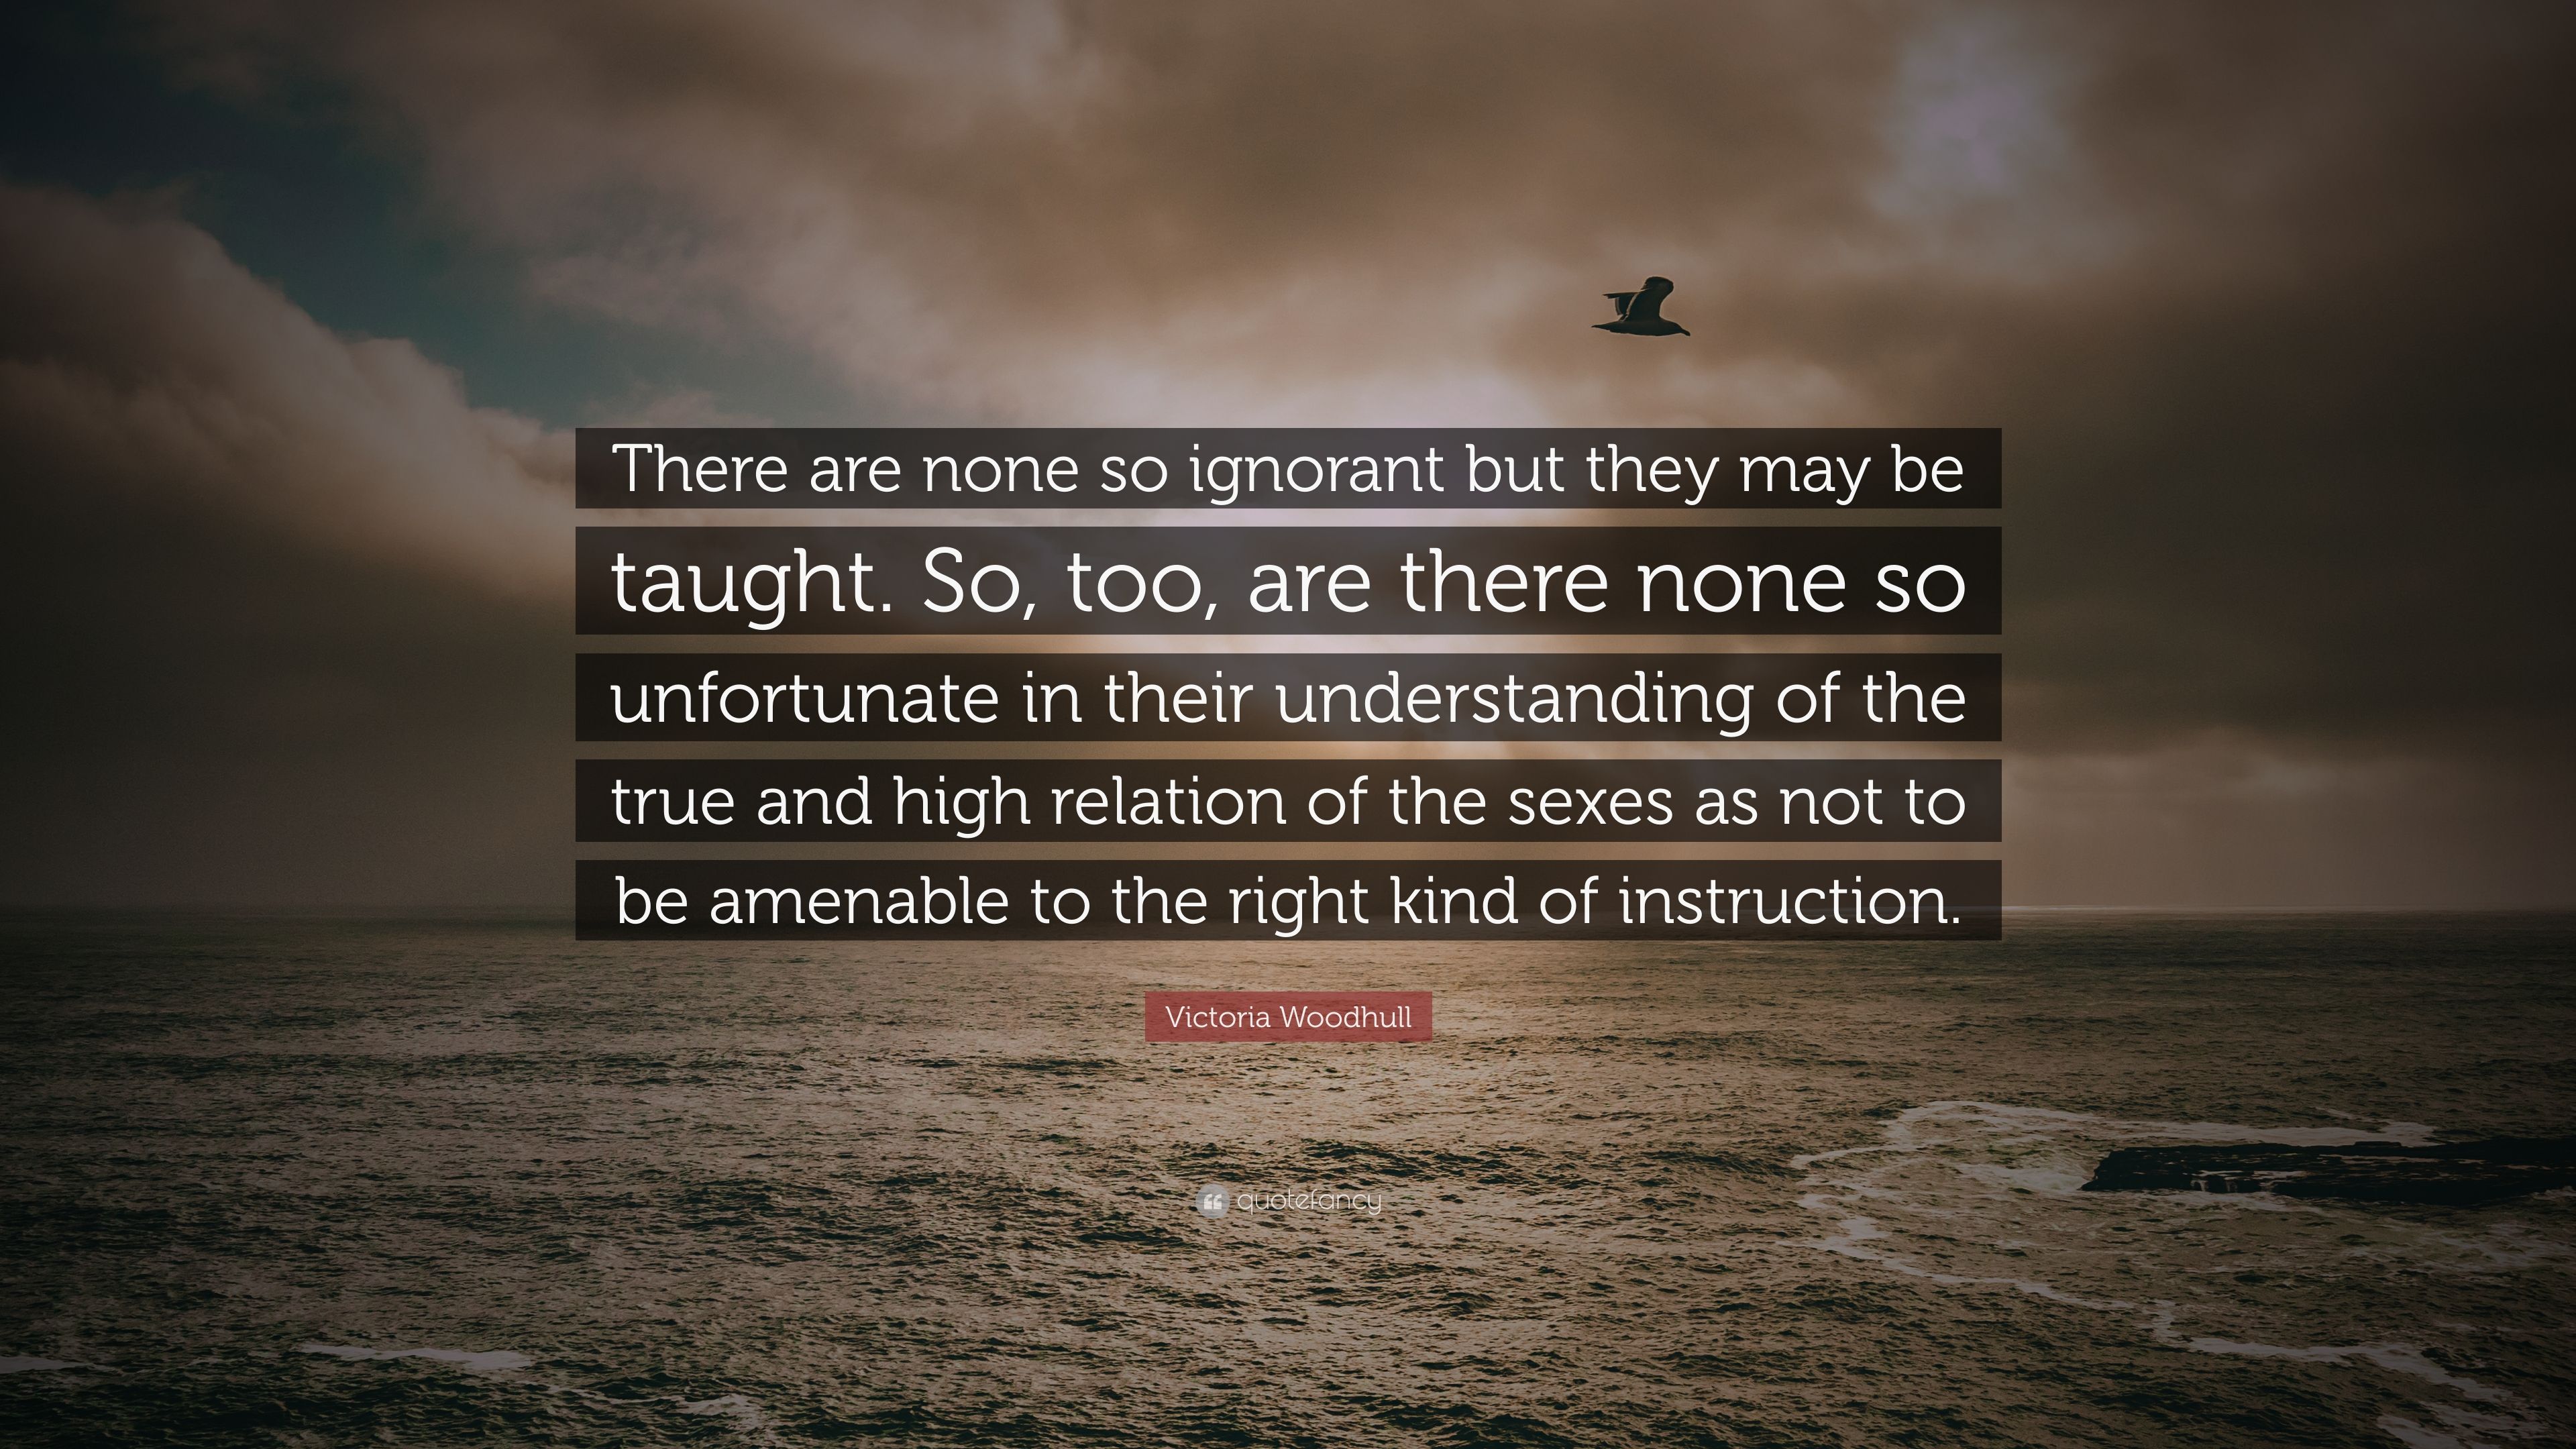 Victoria Woodhull Quote: “There are none so ignorant but they may be ...